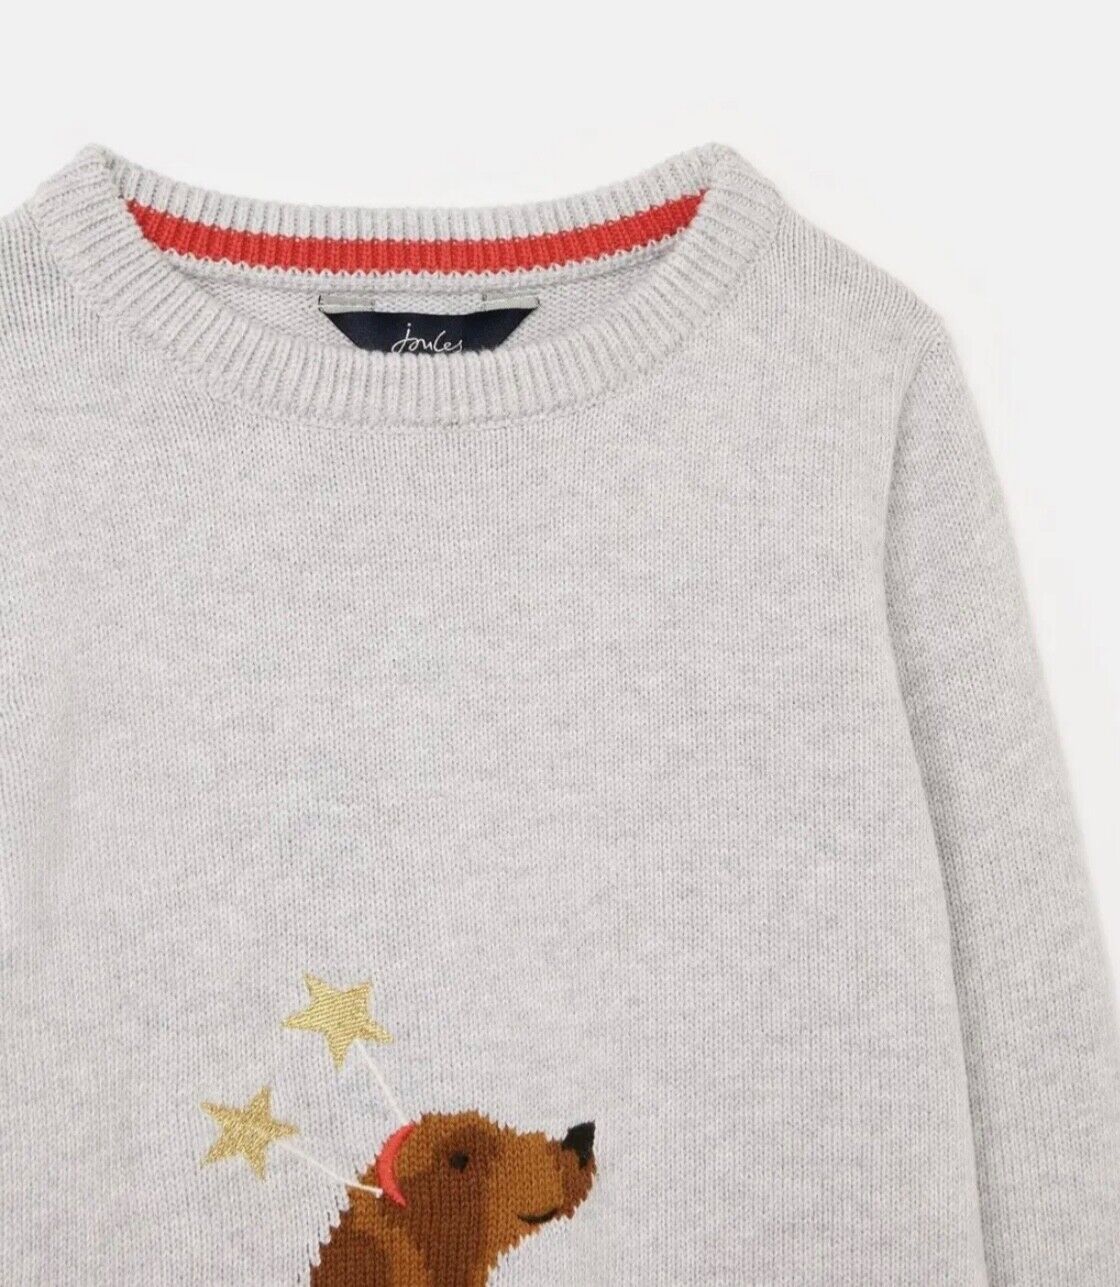 Ex Joules Xmas Christmas Cracking Festive Dachshund Jumper  2 -12 Years RRP £30